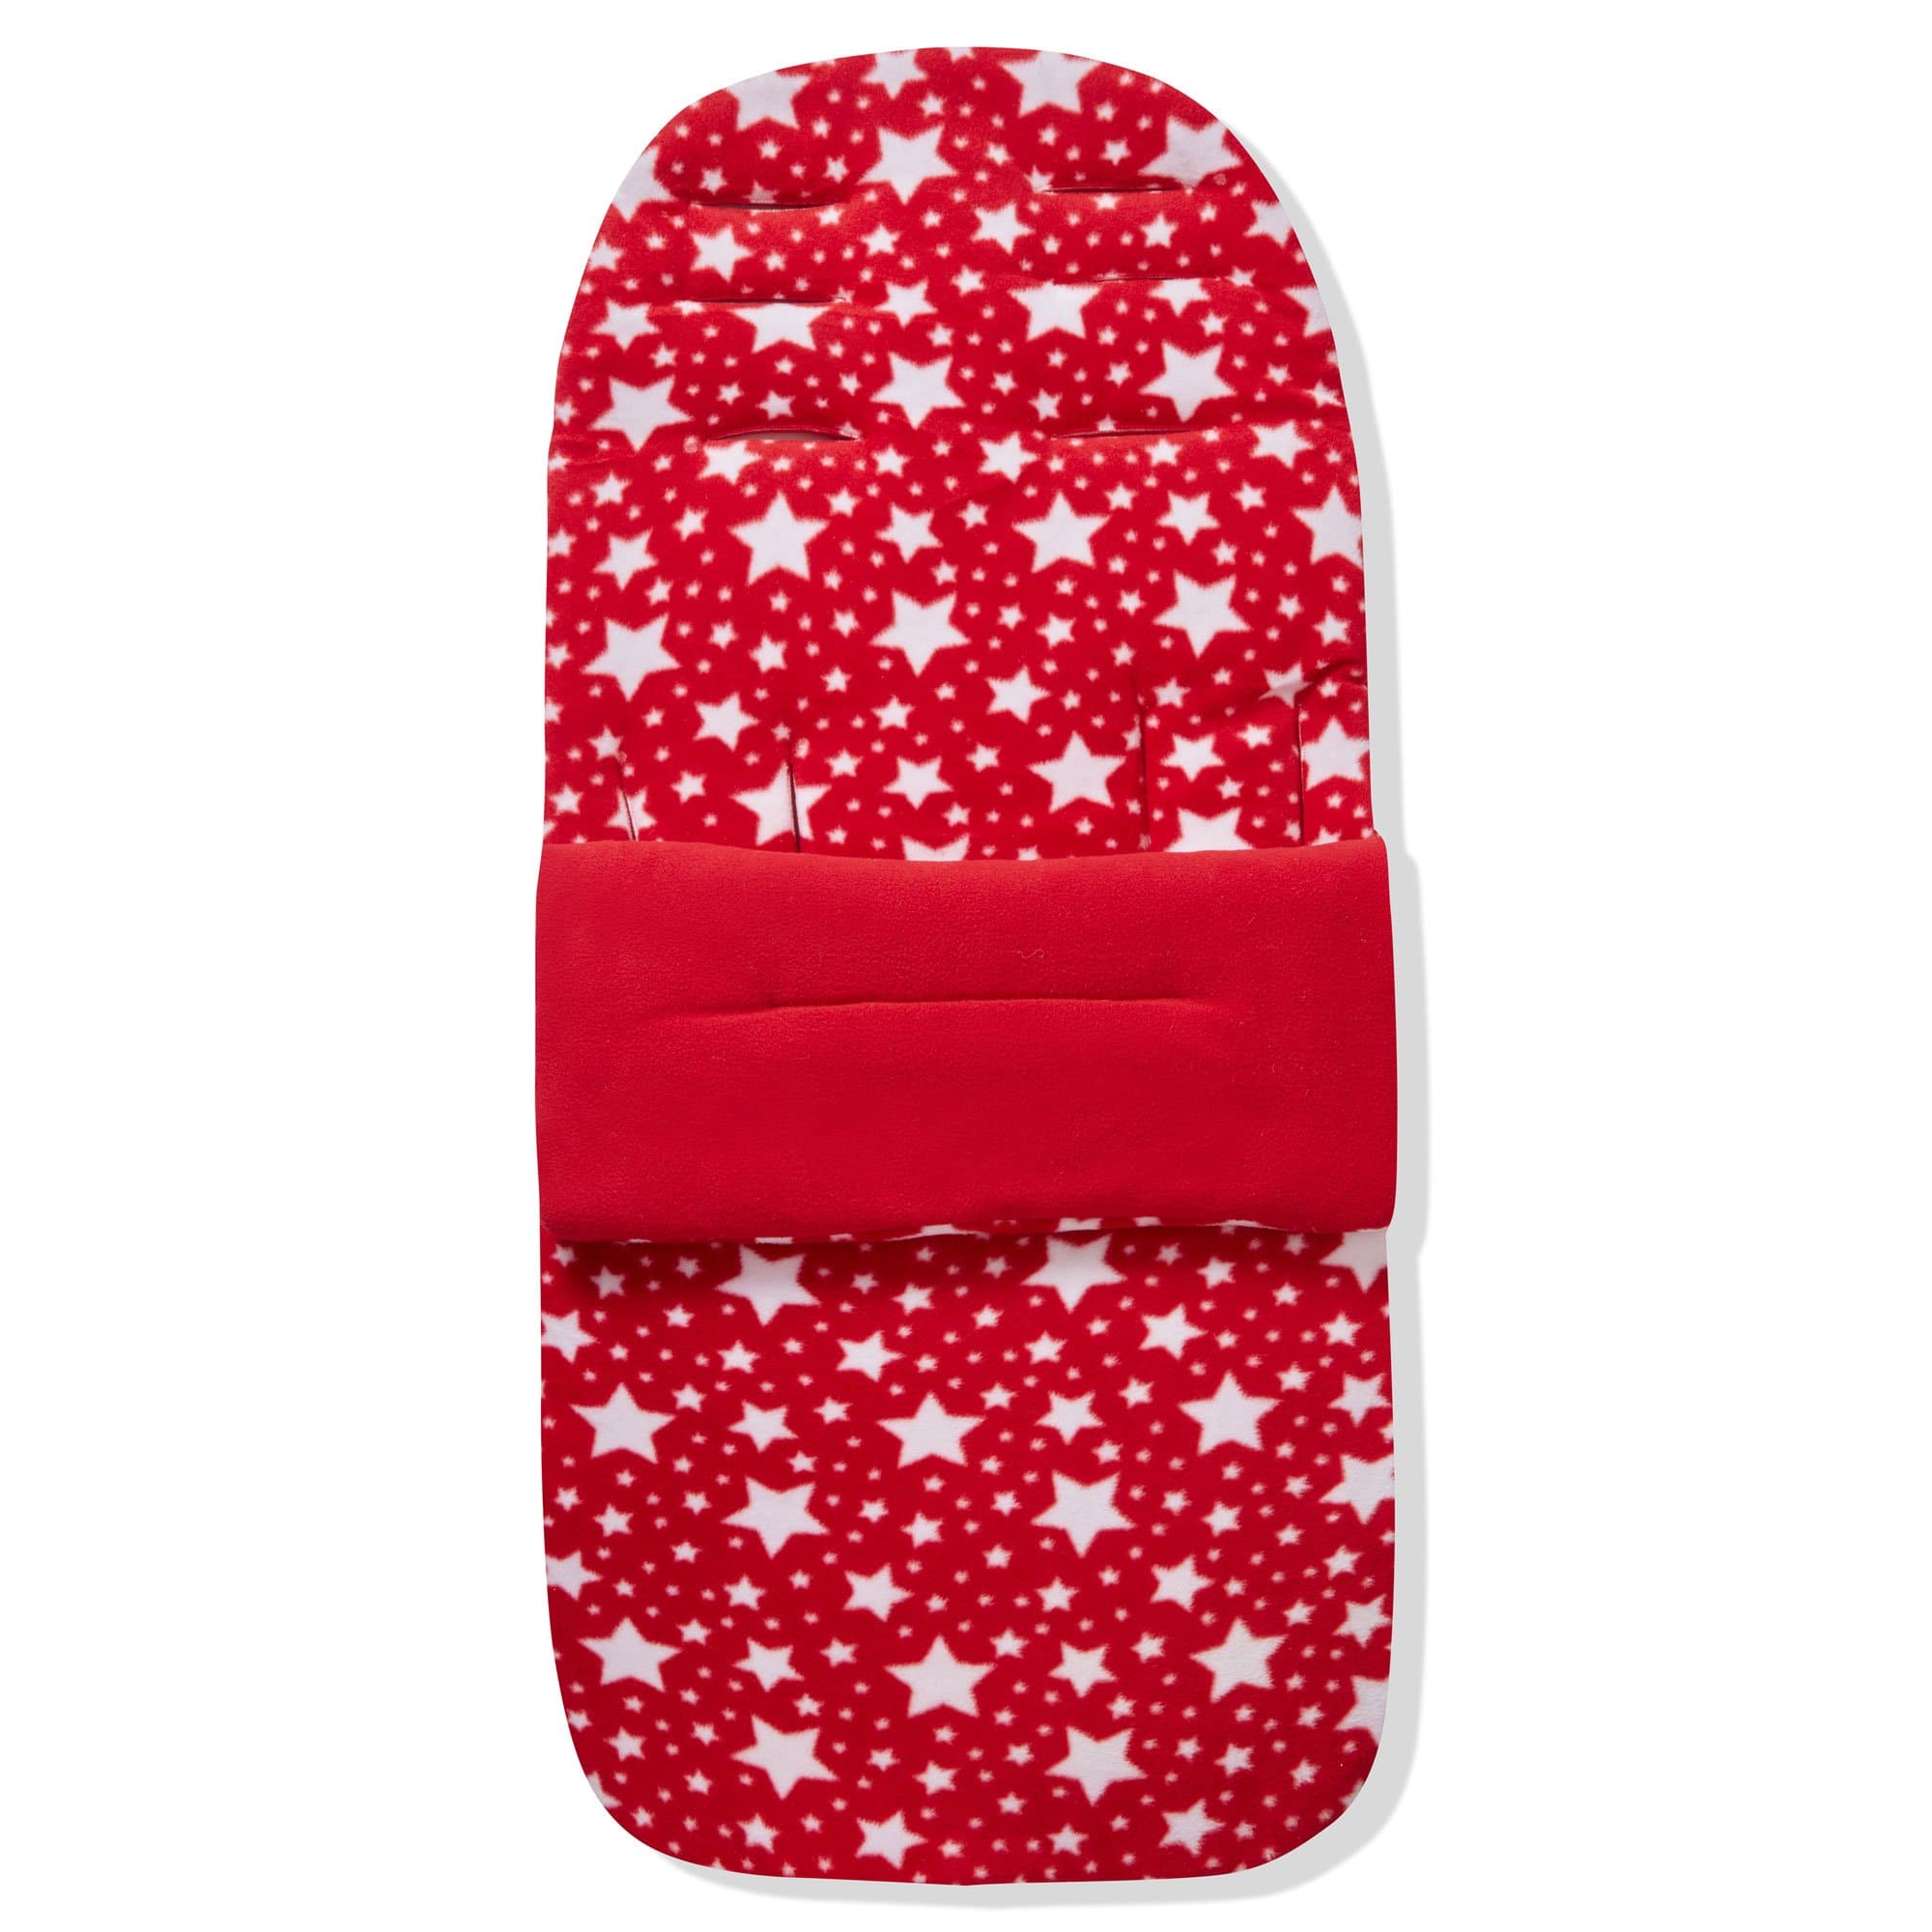 Fleece Footmuff / Cosy Toes Compatible with Uppababy - Red Star / Fits All Models | For Your Little One